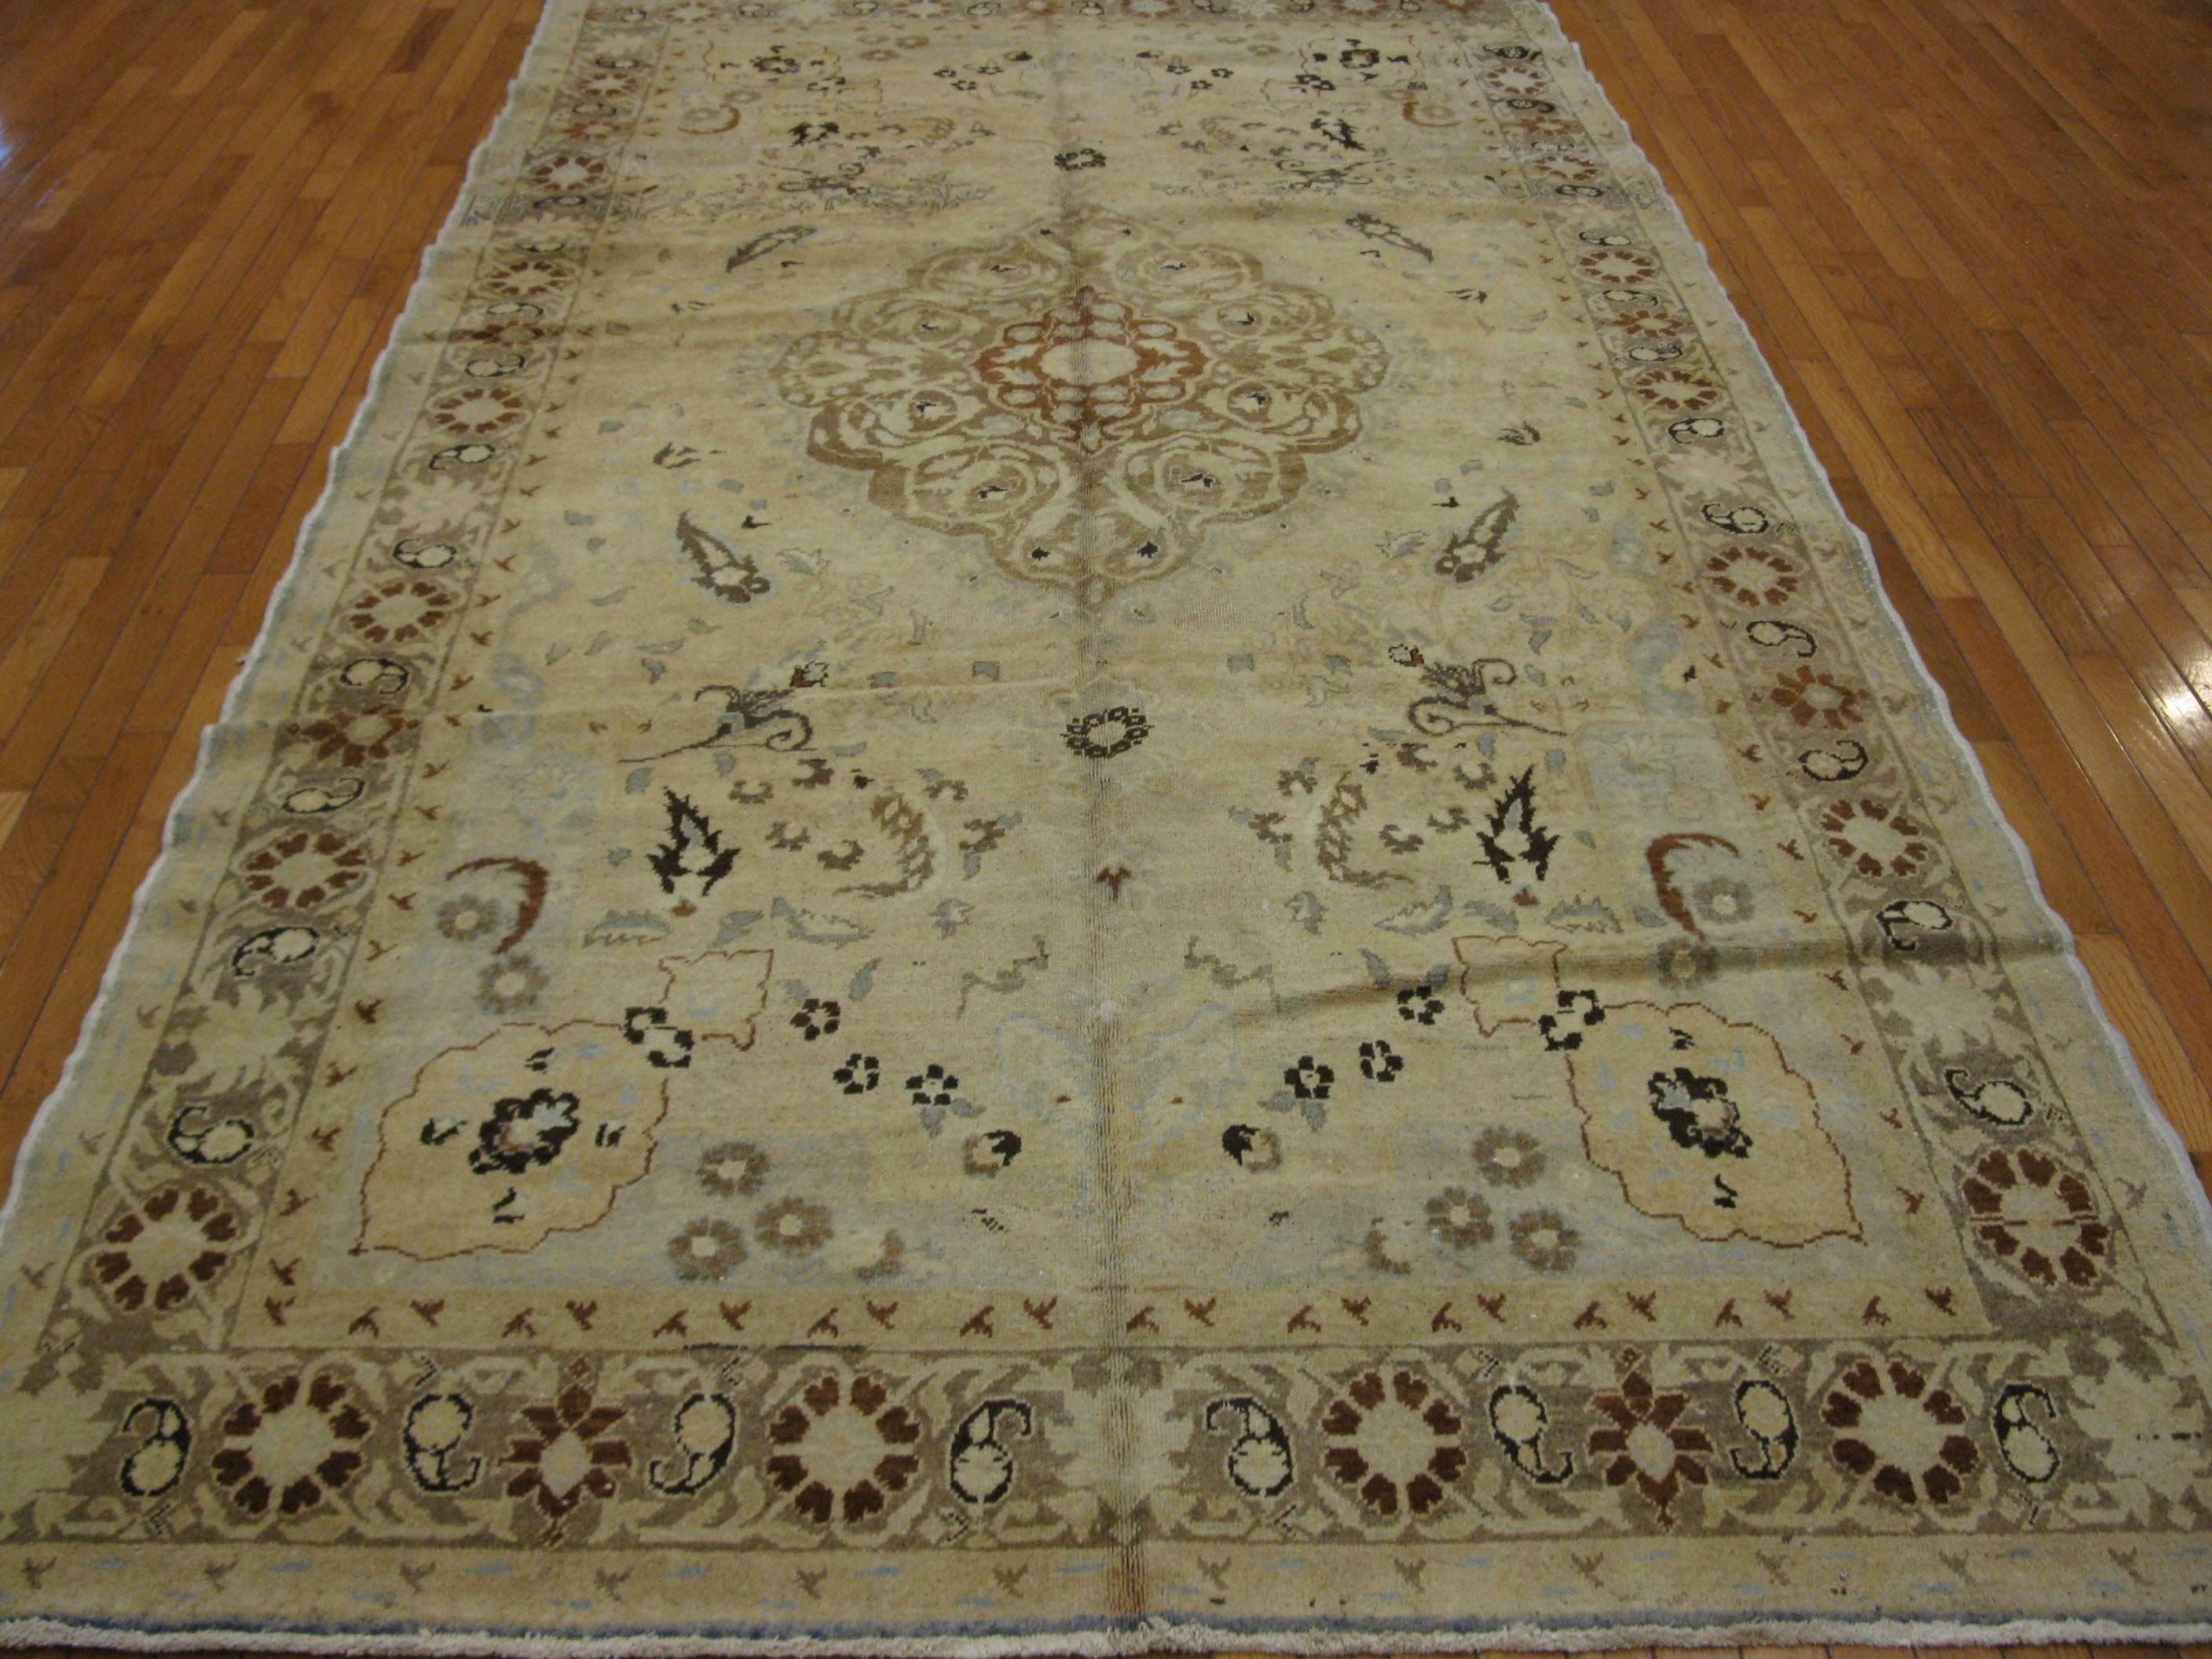 This is a beautiful and elegant hand knotted Turkish rug with soft colors and a detailed pattern in a traditional central and corner medallion design. The rug measures 5' 10'' x 11' 2''.